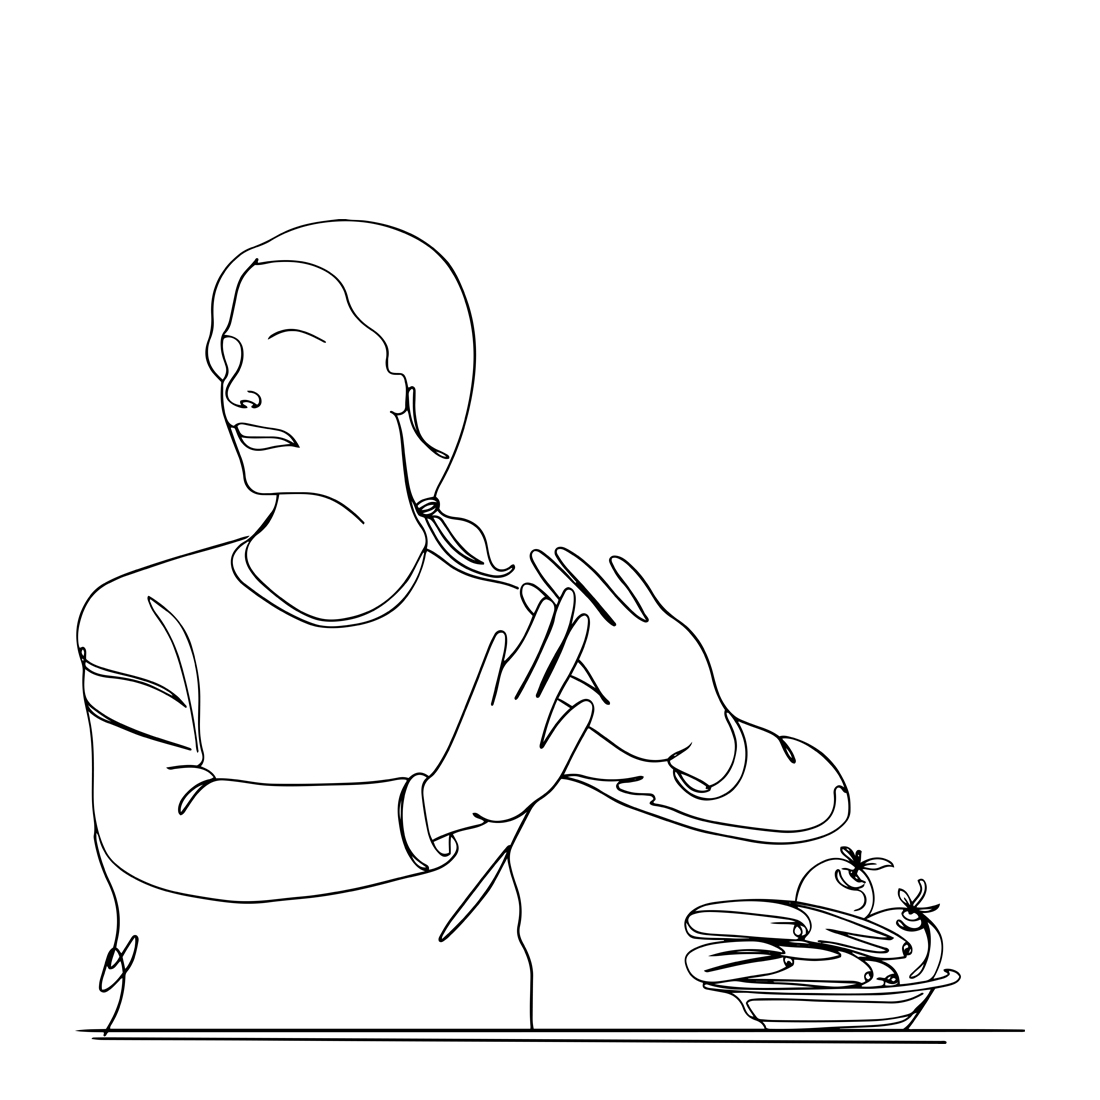 Eating Disorder Struggle: Anorexic Woman One Line Illustration, Meal Struggle Art: Unhappy Anorexic Woman , Sensitive Illustration: Anorexia Struggle preview image.